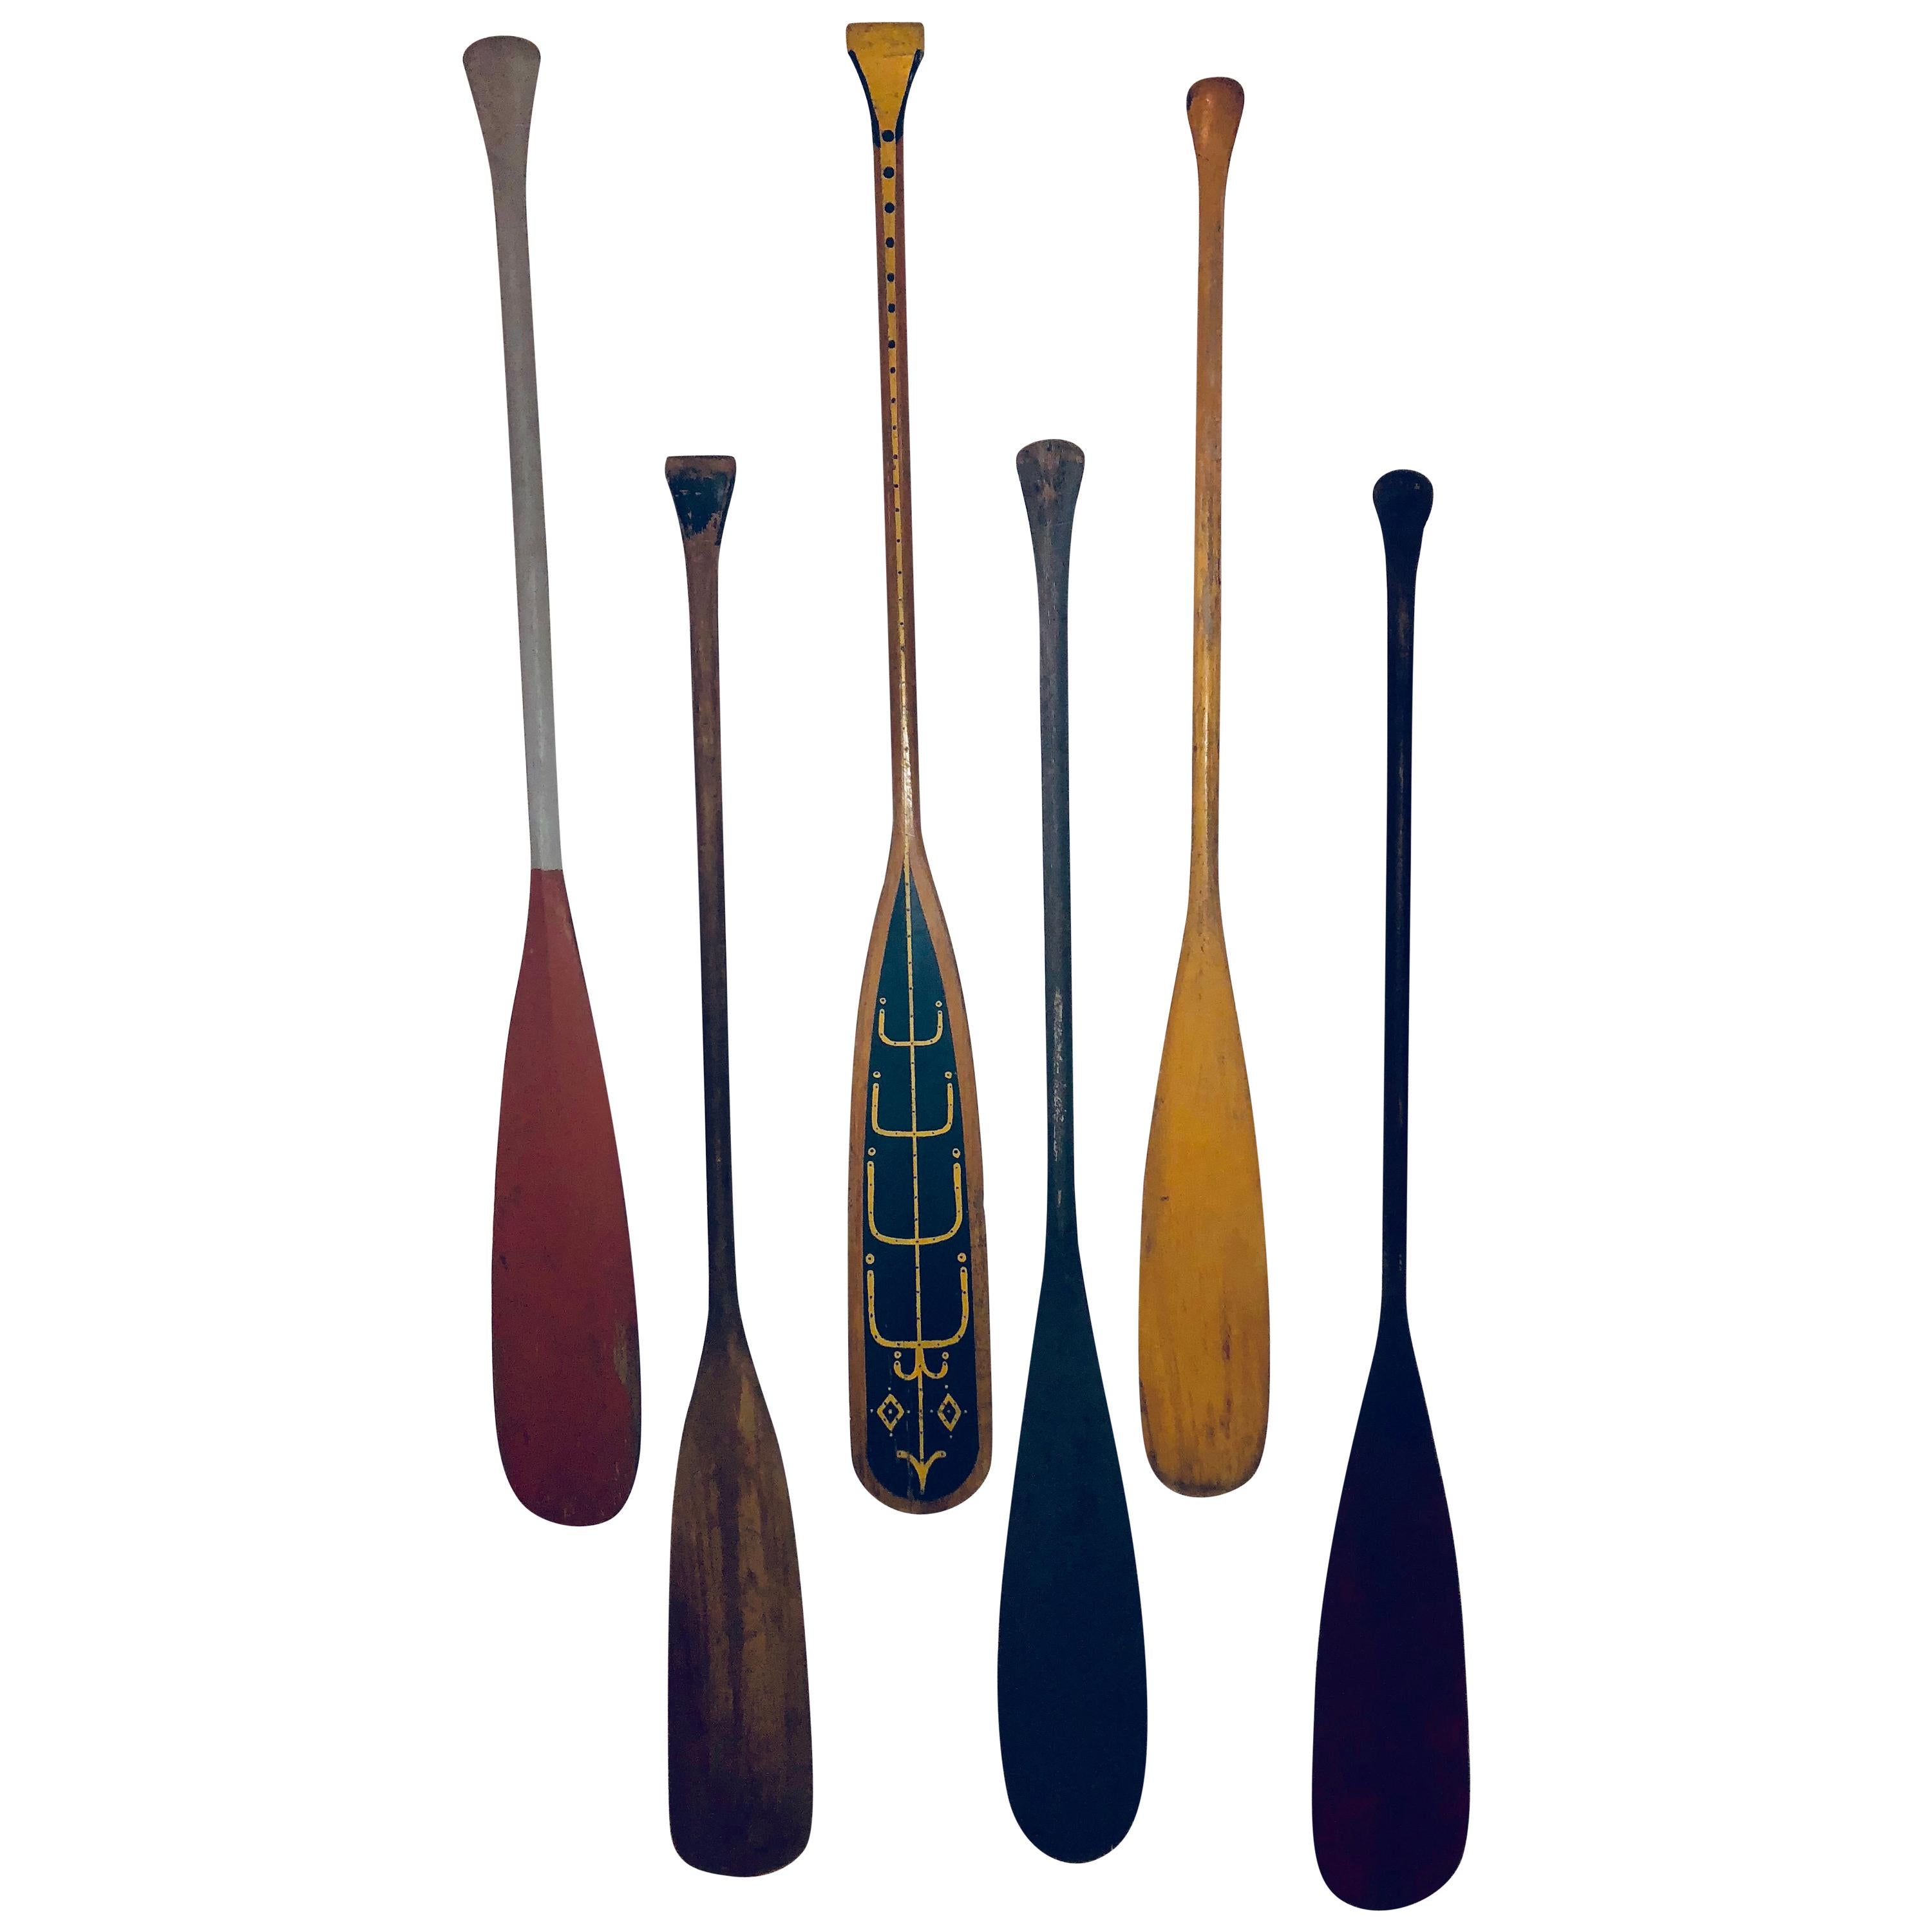 Collection of Six Antique Wooden Canoe Paddles with Original Painted Surfaces